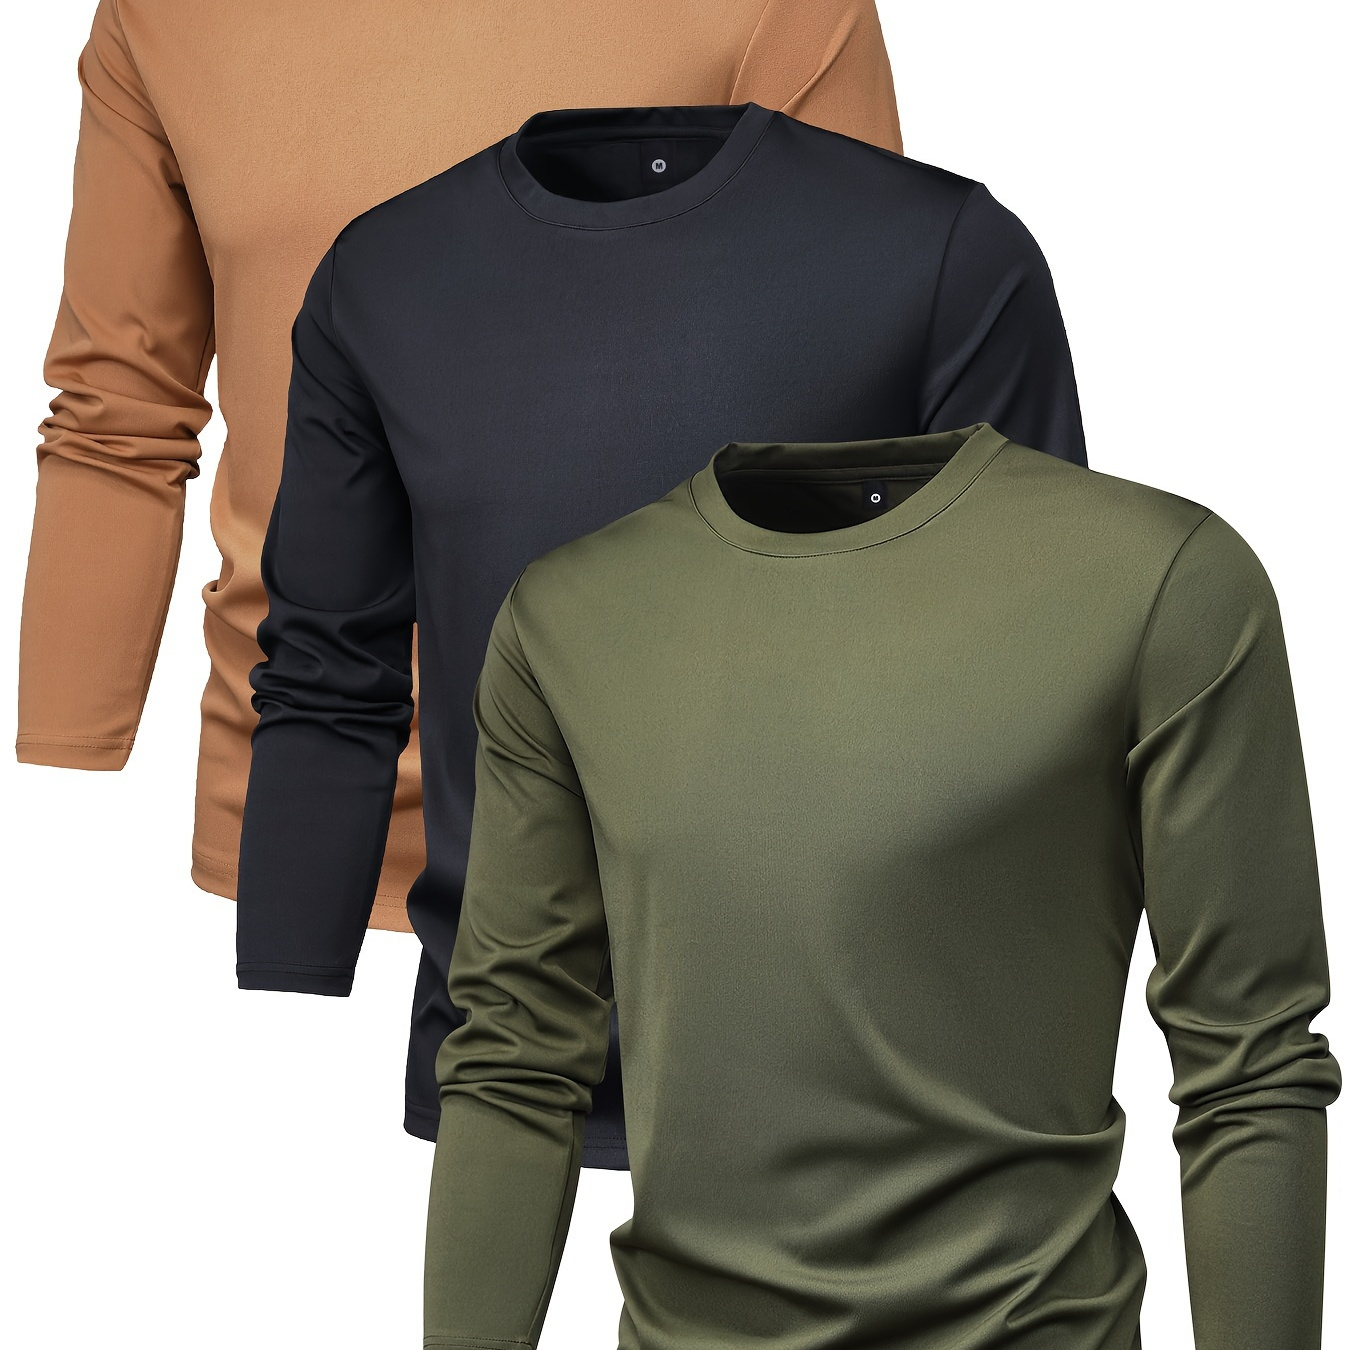 

3pcs Men's Crew Neck Long Sleeve Active T-shirt Tee, Casual Comfy Shirts For Spring Summer Autumn, Men's Clothing Tops